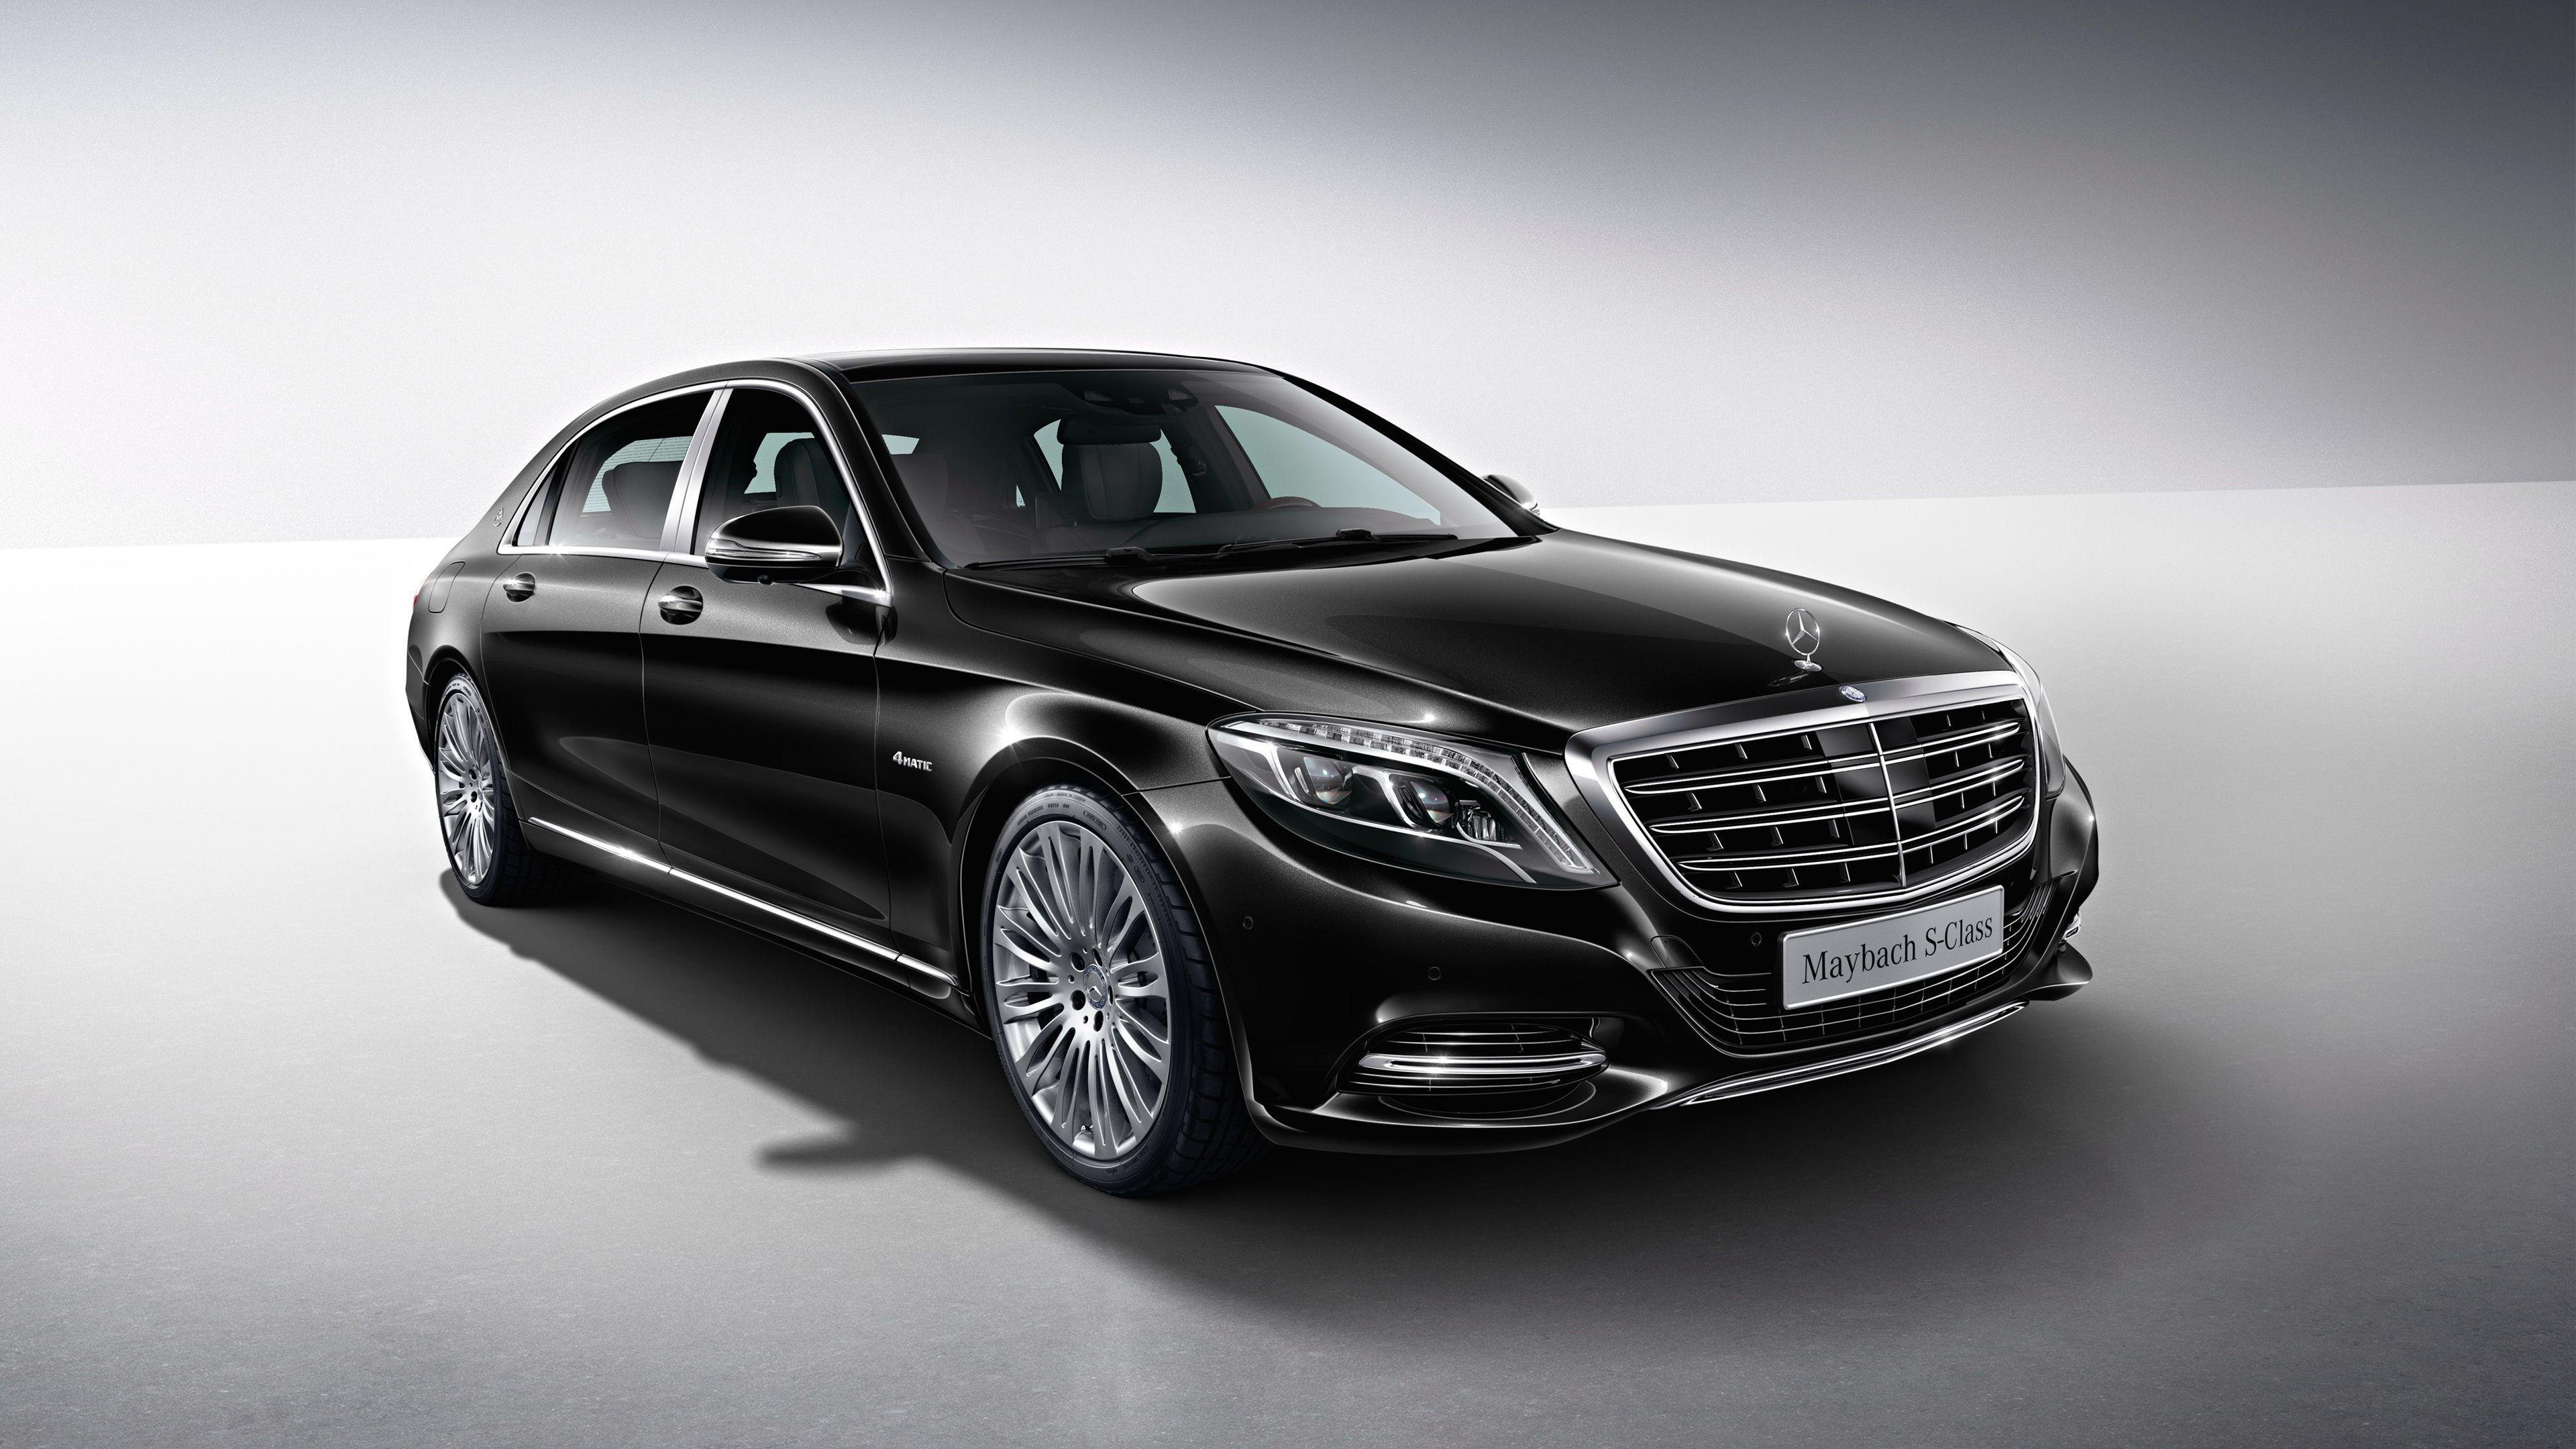 Classy Mercedes S Class Wallpaper To Give Your Screen Lavish Look